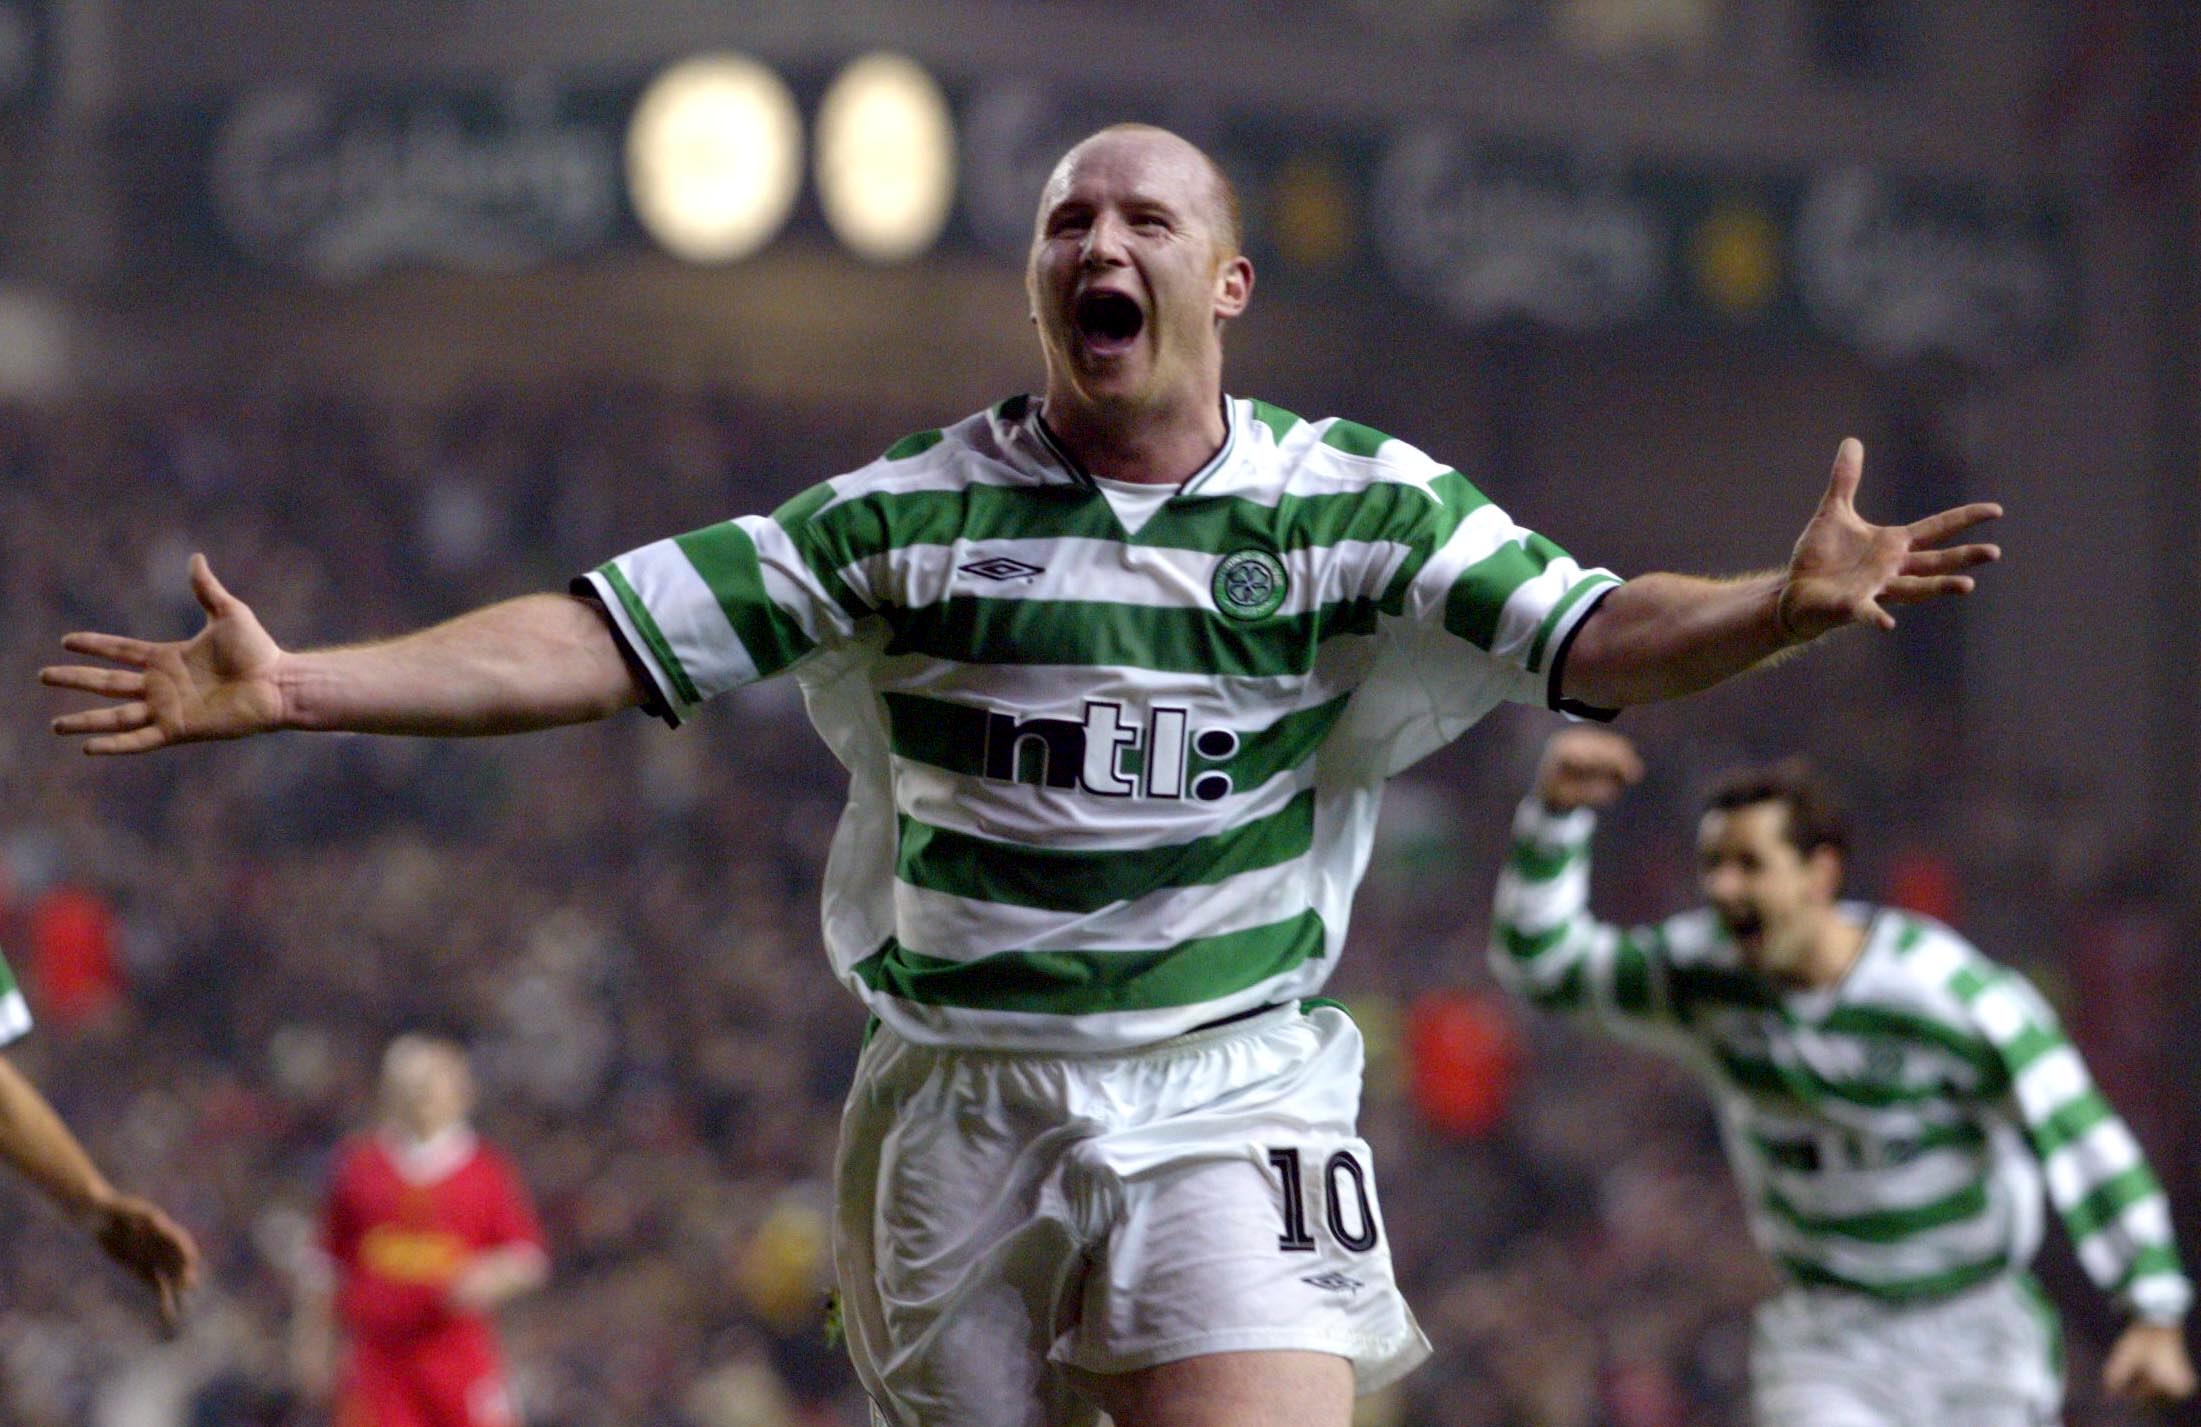 Anfield: Hartson celebrates goal in 2-0 win over Liverpool. 